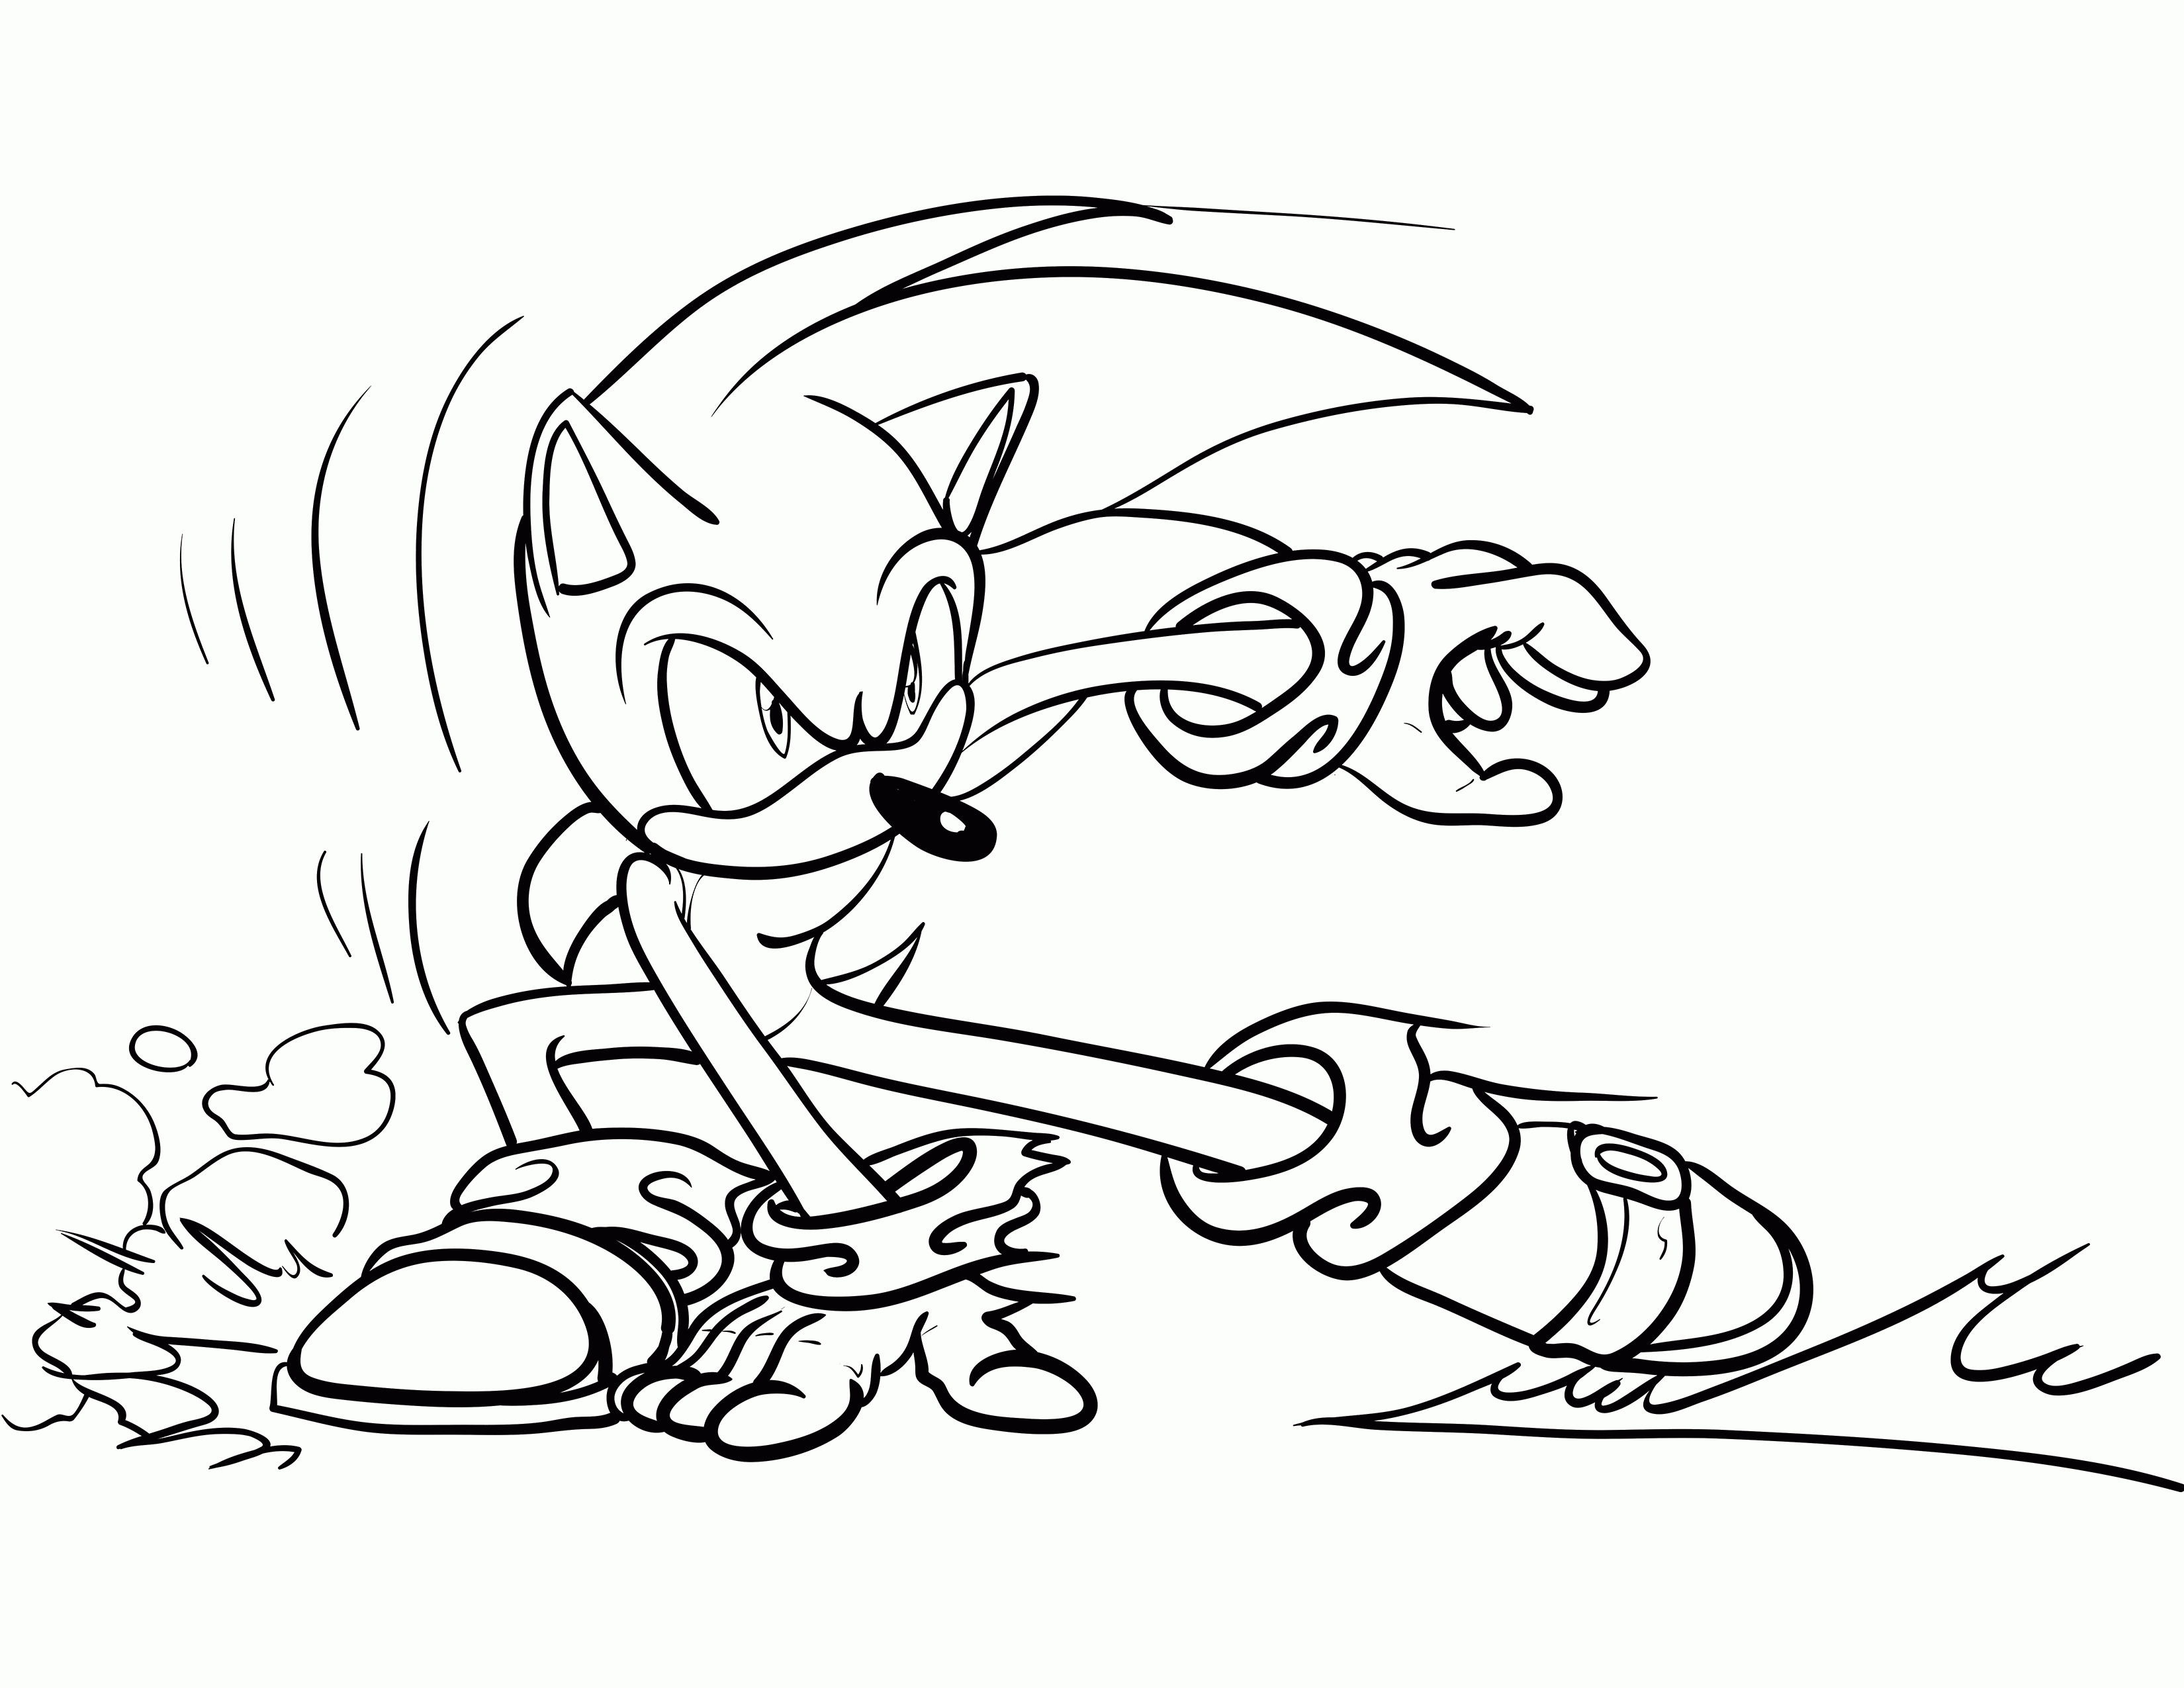 Free Sonic The Hedgehog Running Coloring Pages, Download Free Sonic The